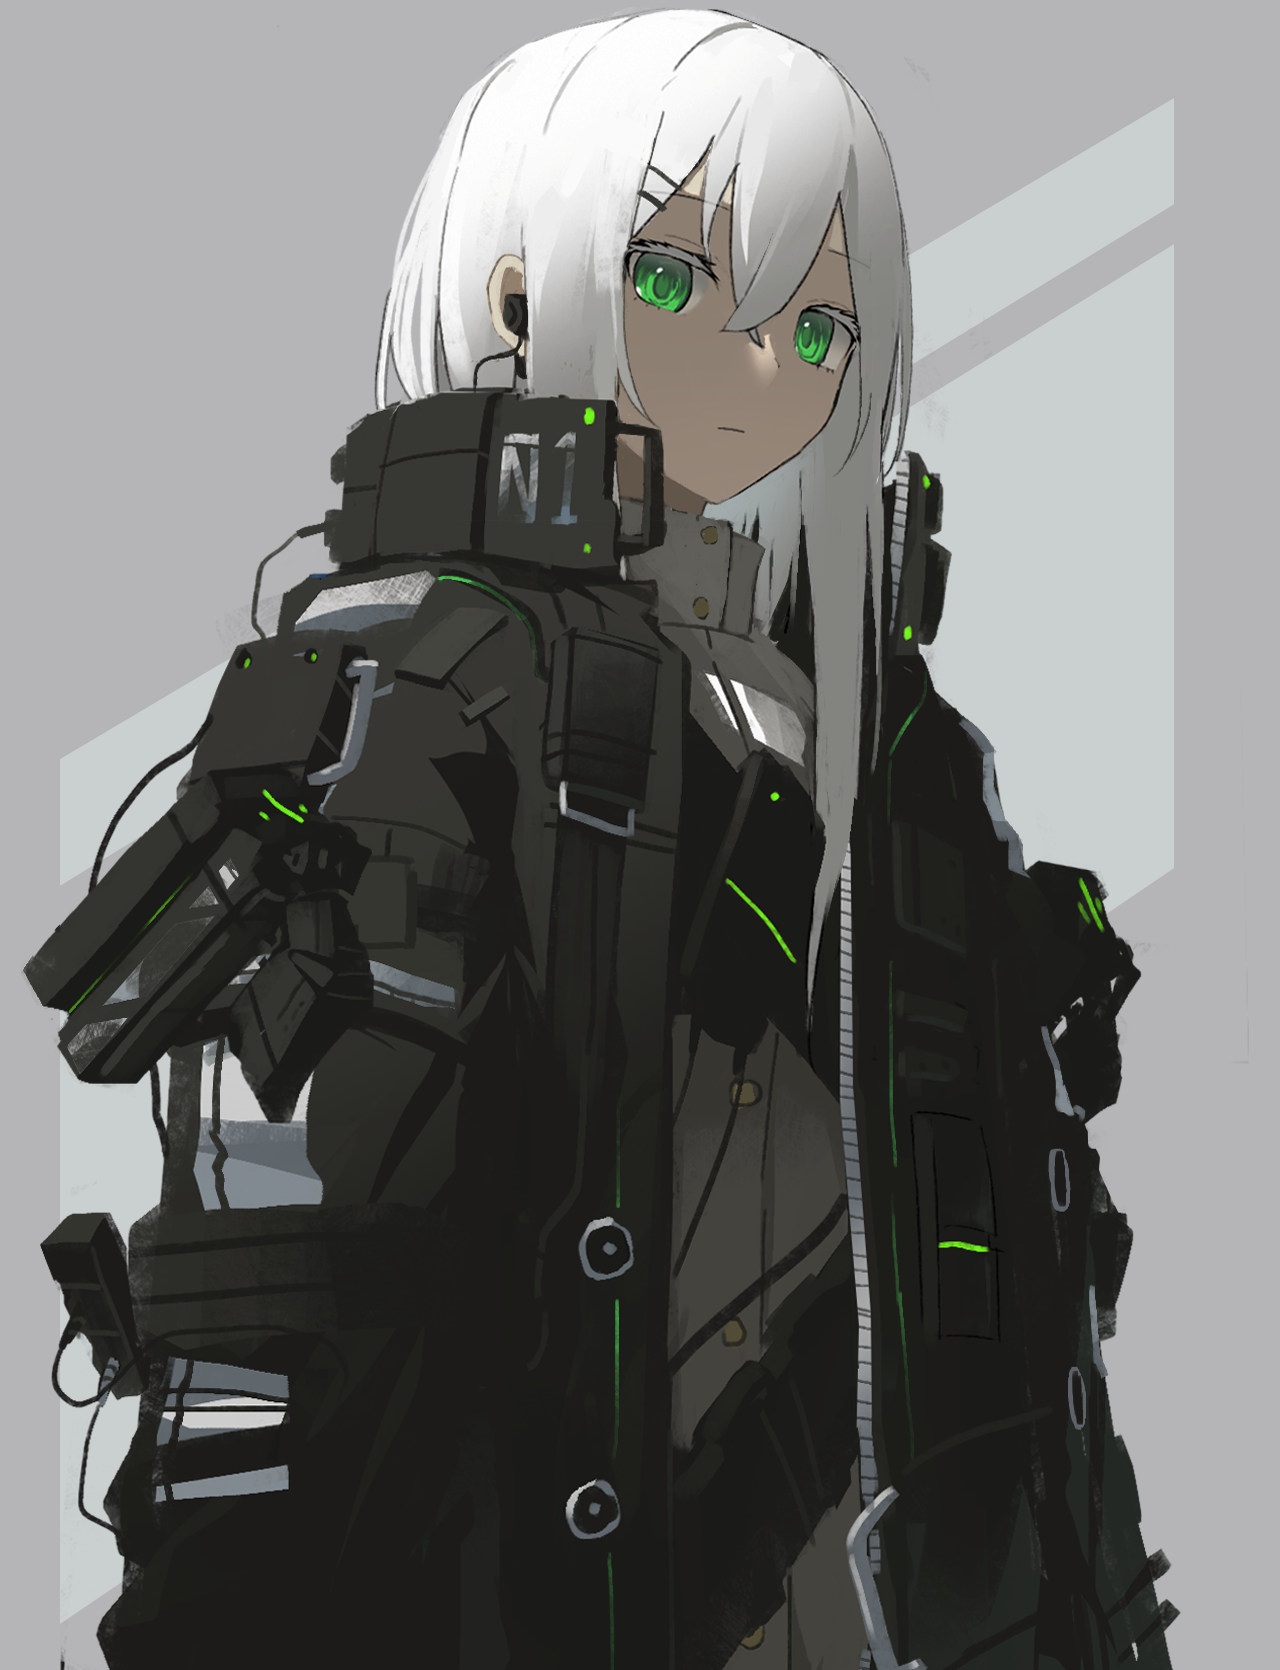 anime girl with white hair and green eyes